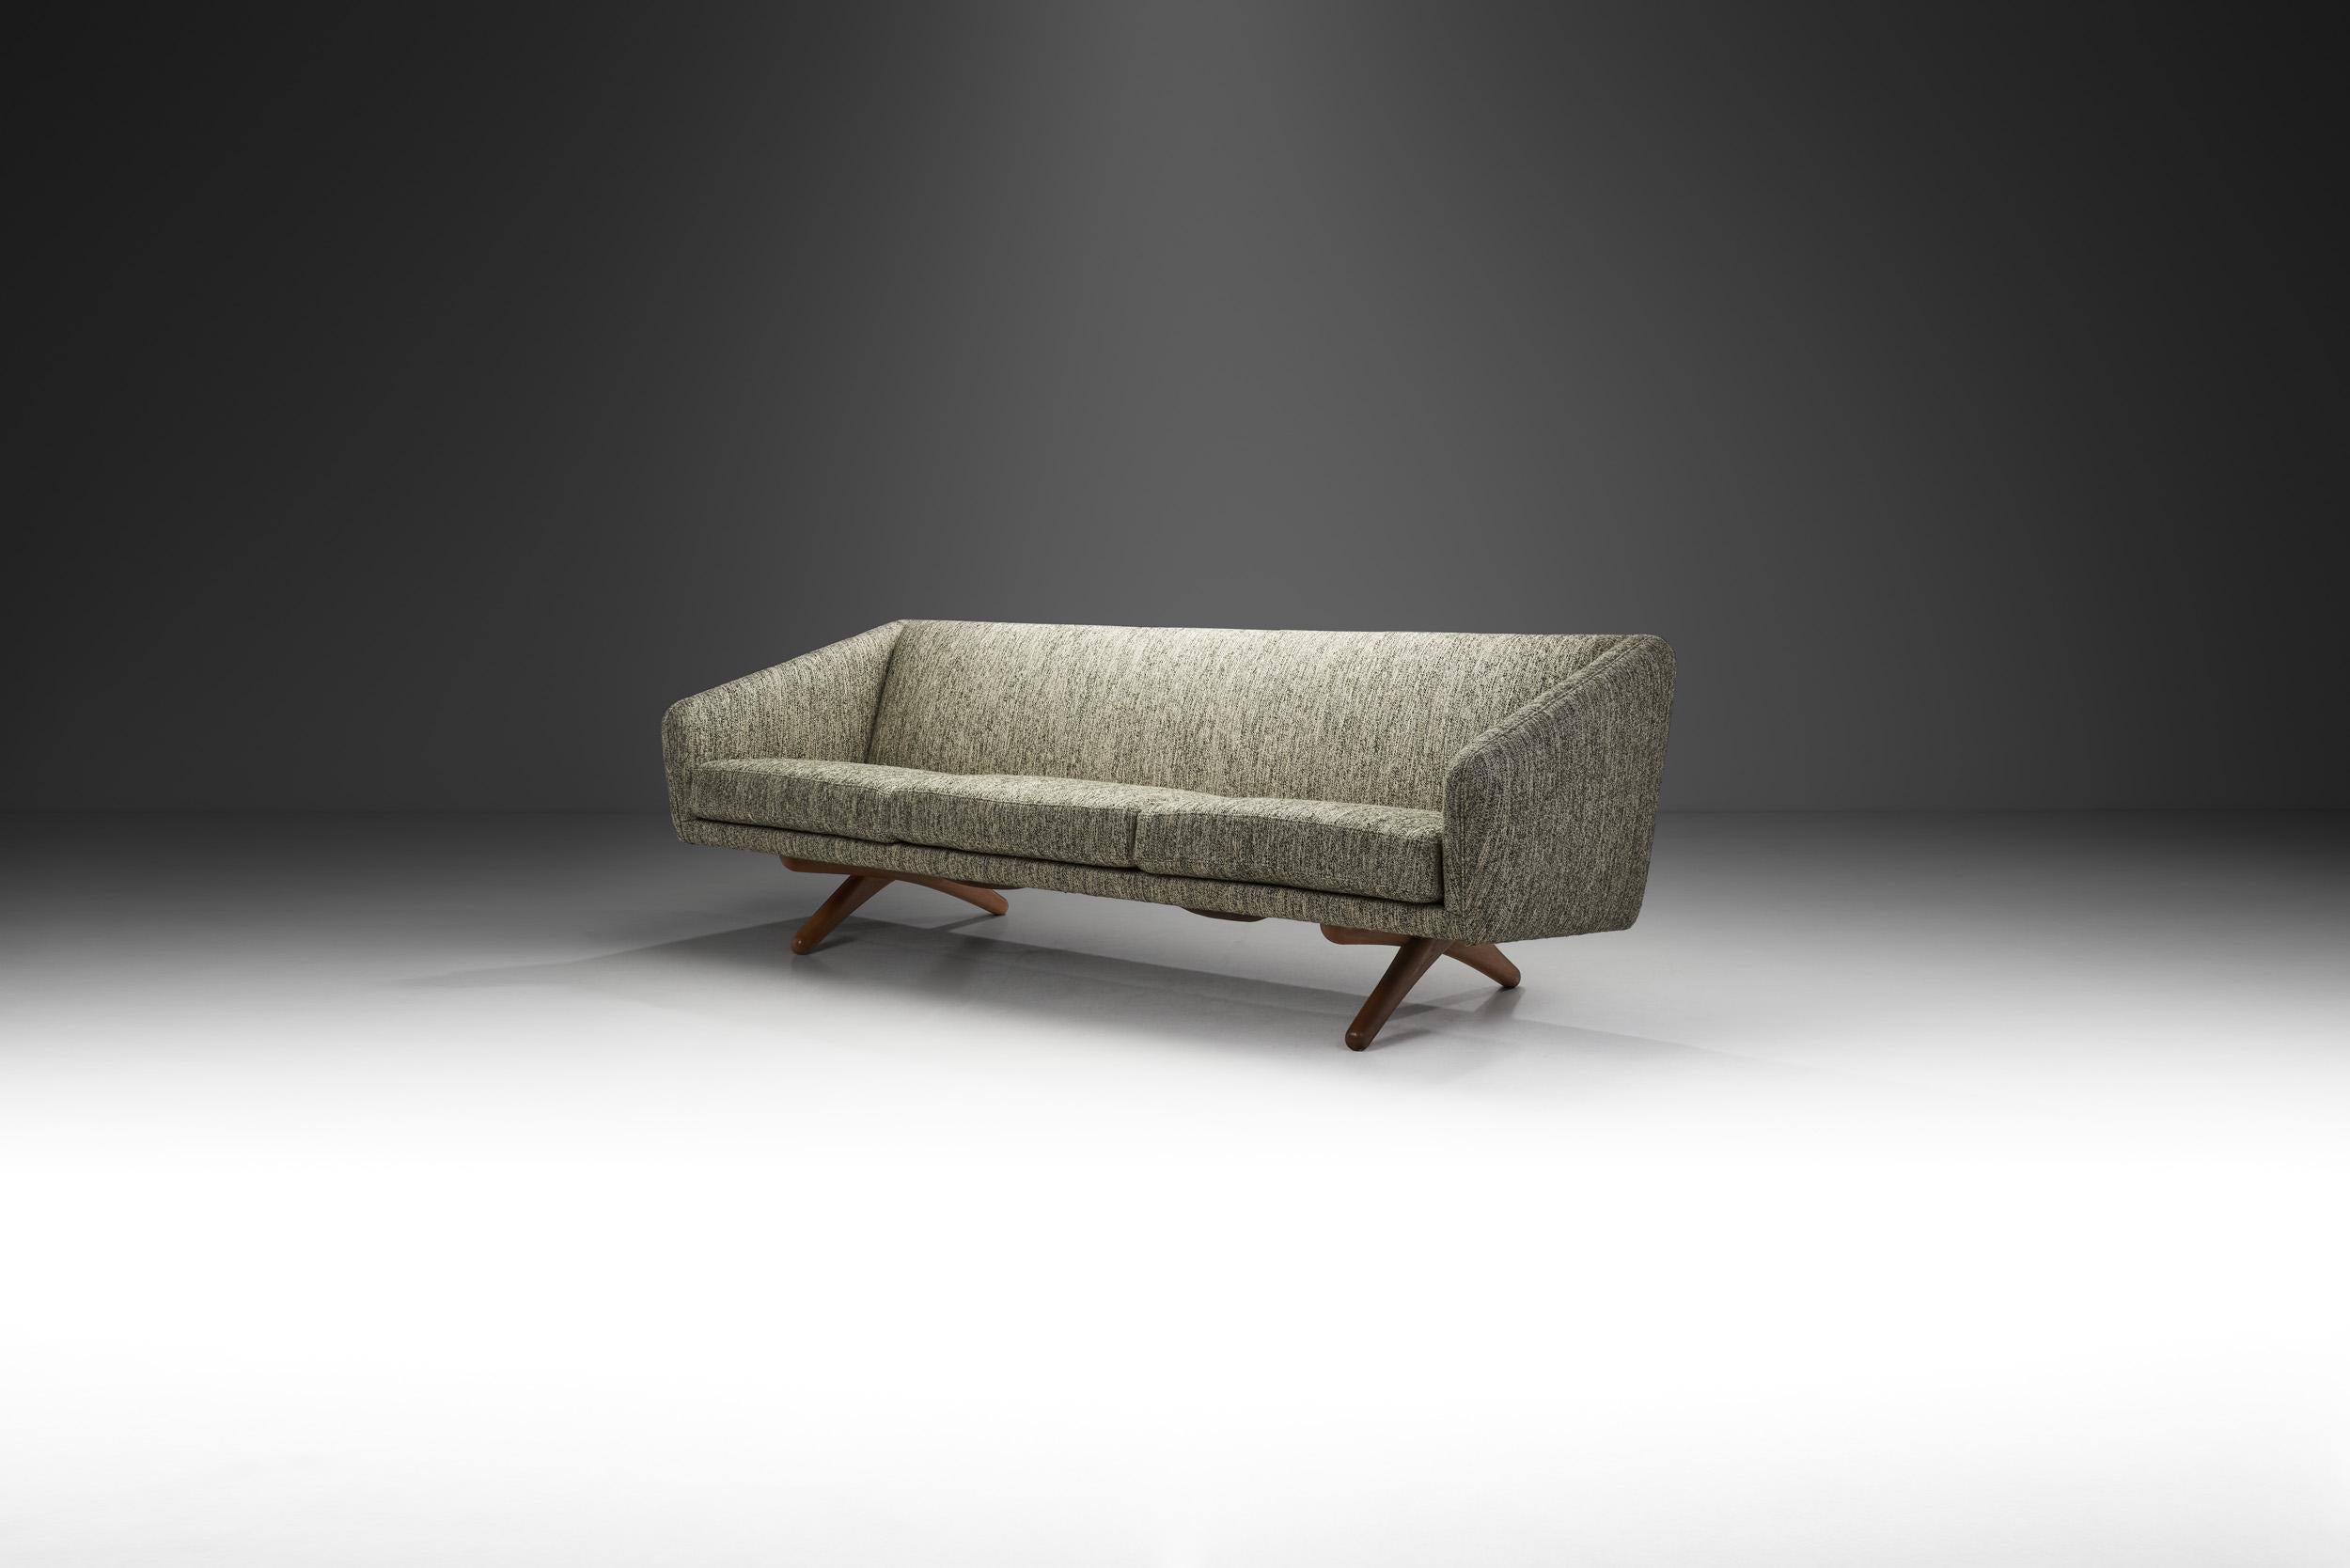 Generally speaking, Mid-Century Modern furniture is characterized by clean lines, an open design and classic shapes. This streamlined three-seater sofa not only possesses all these visual qualities, it pairs them with exquisite craftsmanship and